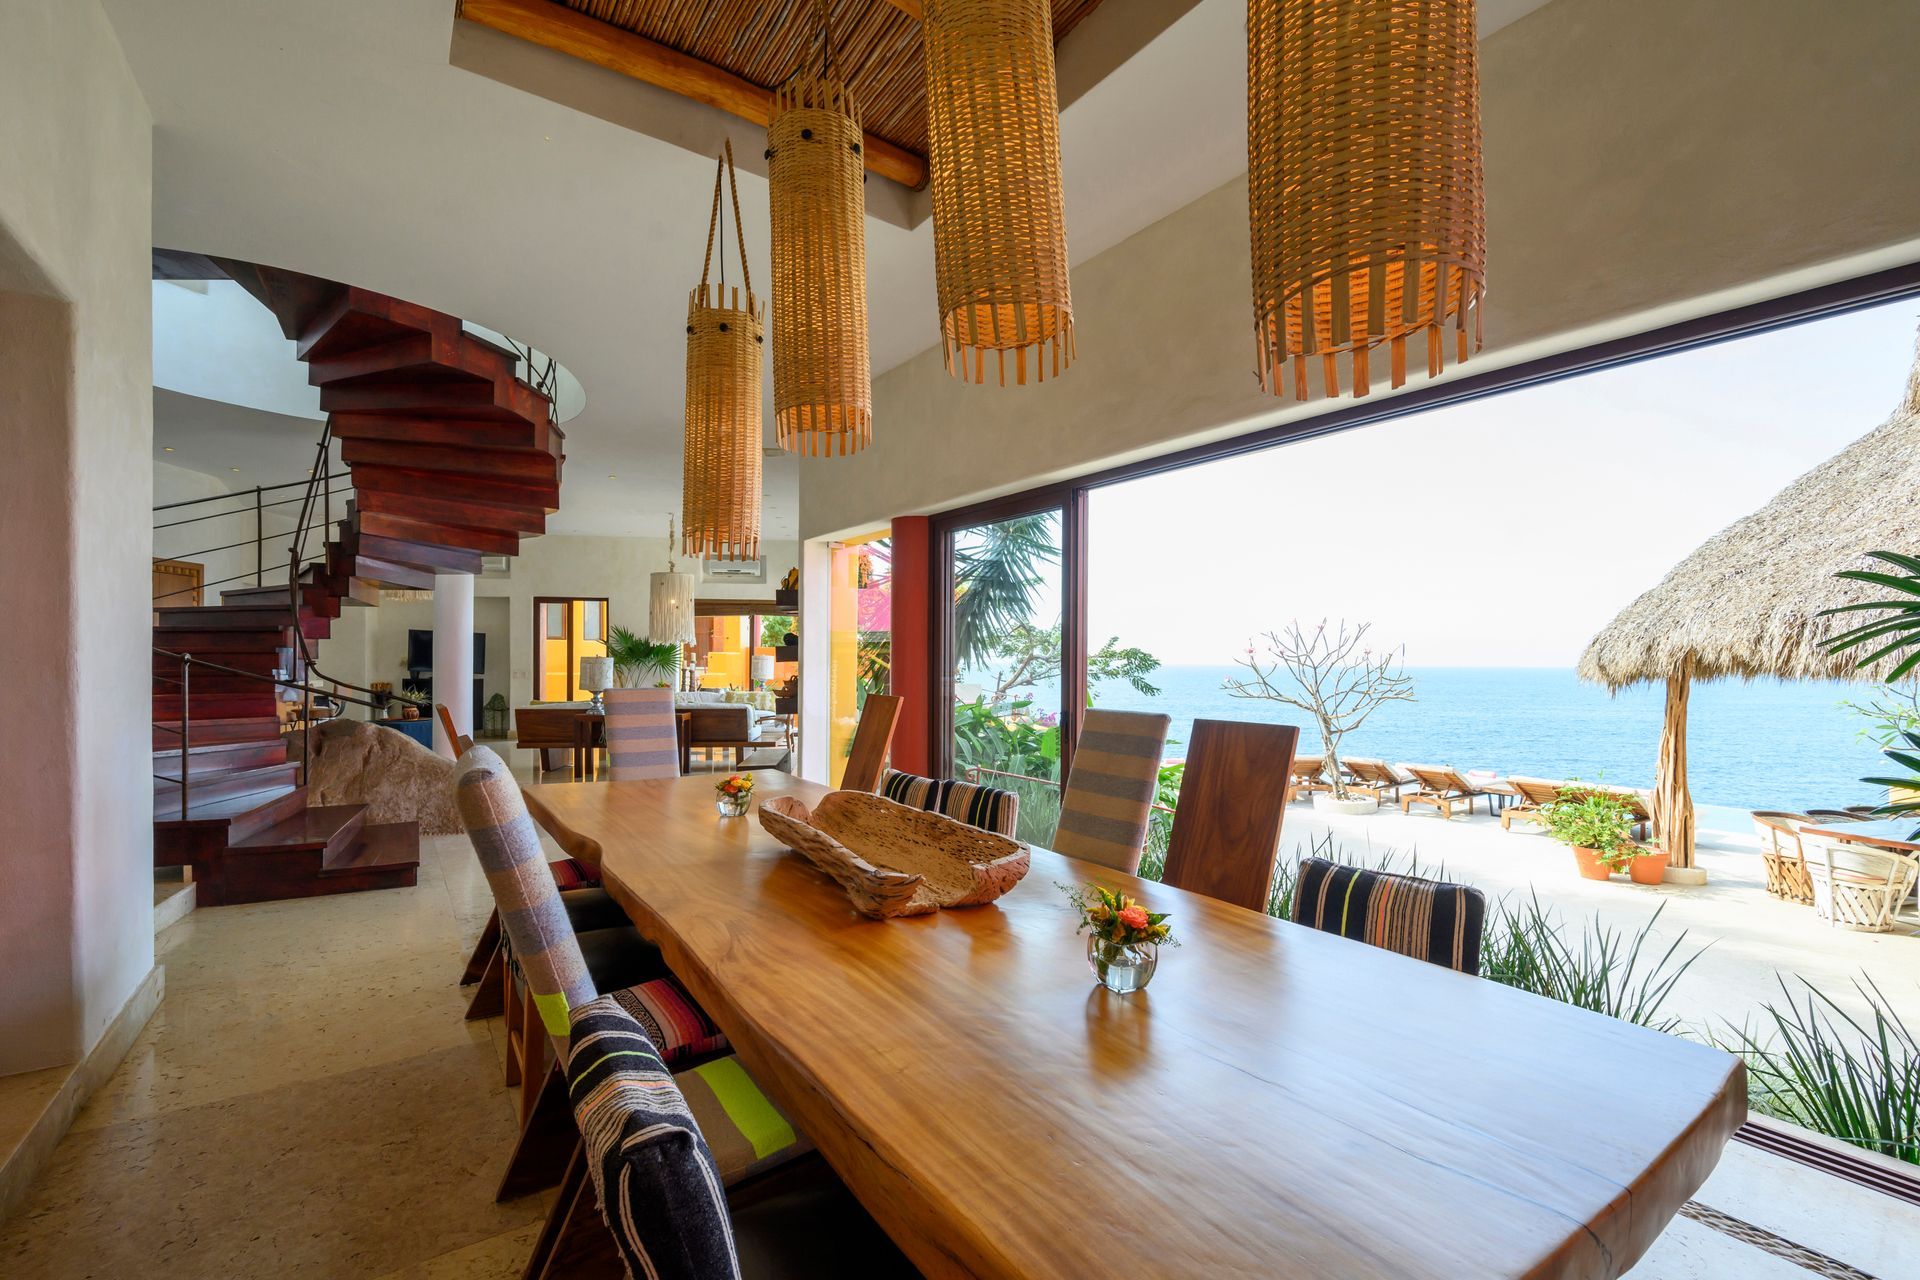 a large wooden table and chairs in a dining room with a view of the ocean